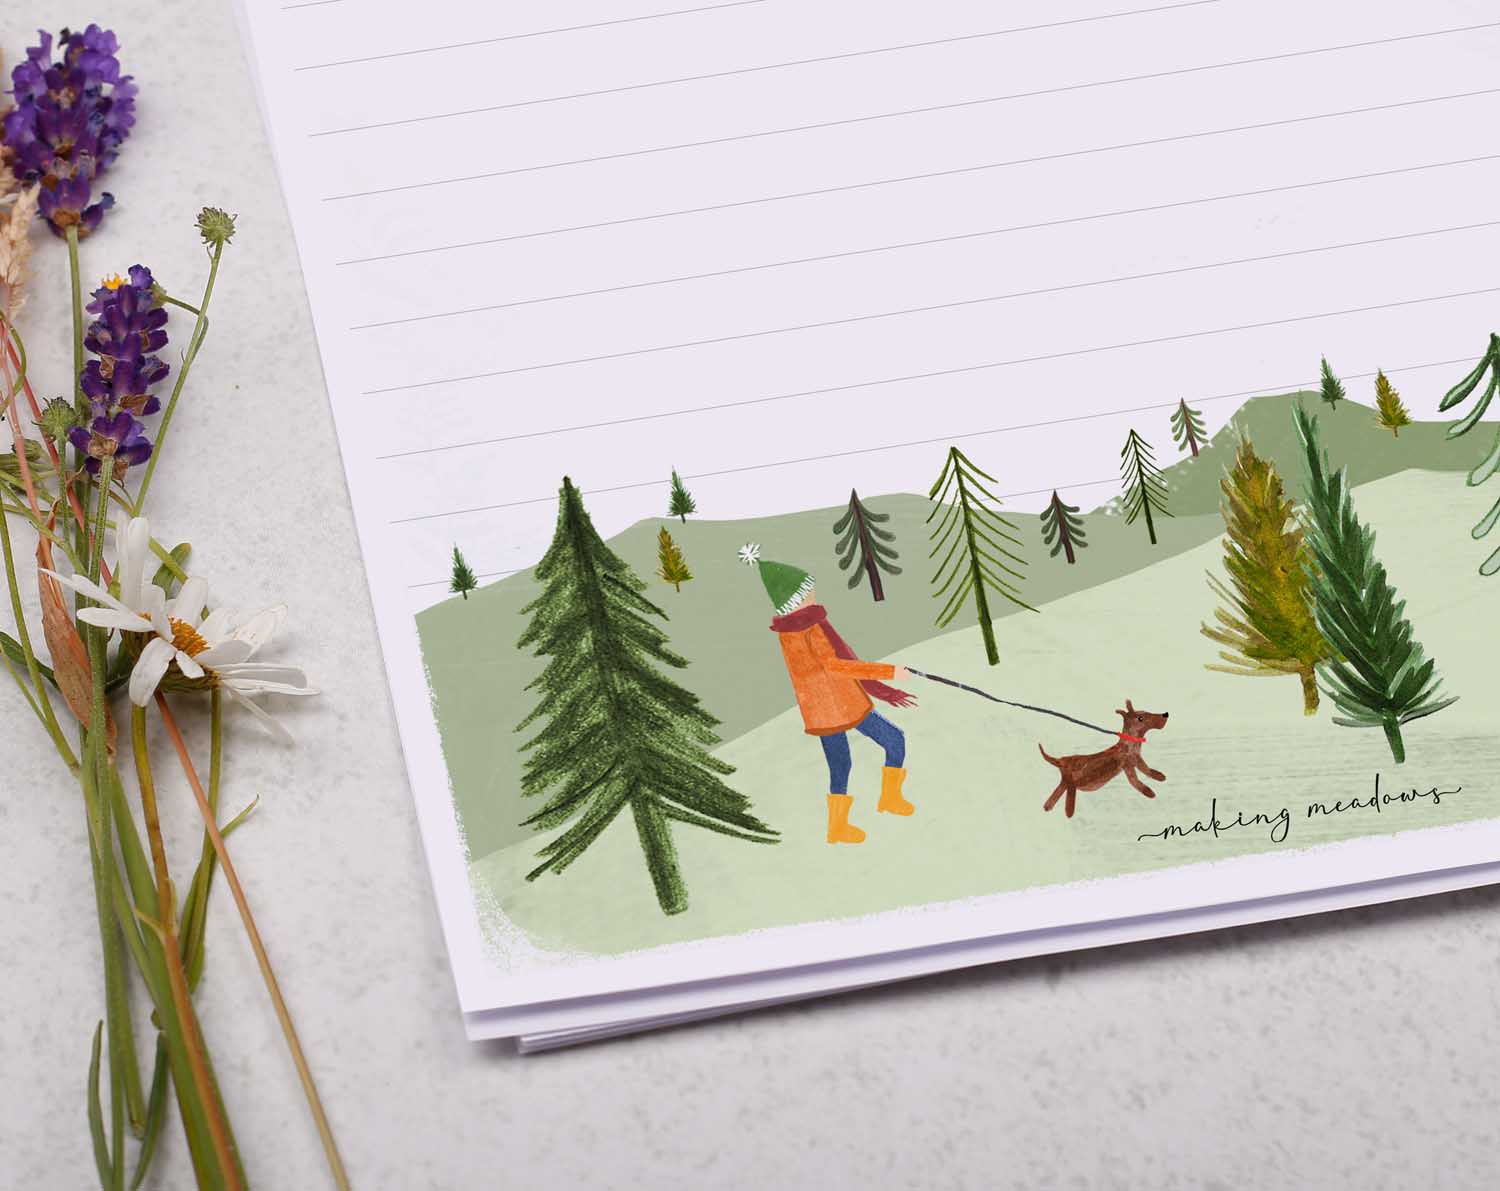 A4 letter writing paper sheets with a cute illustration of a dog walker surrounded by rolling hills and countryside. 